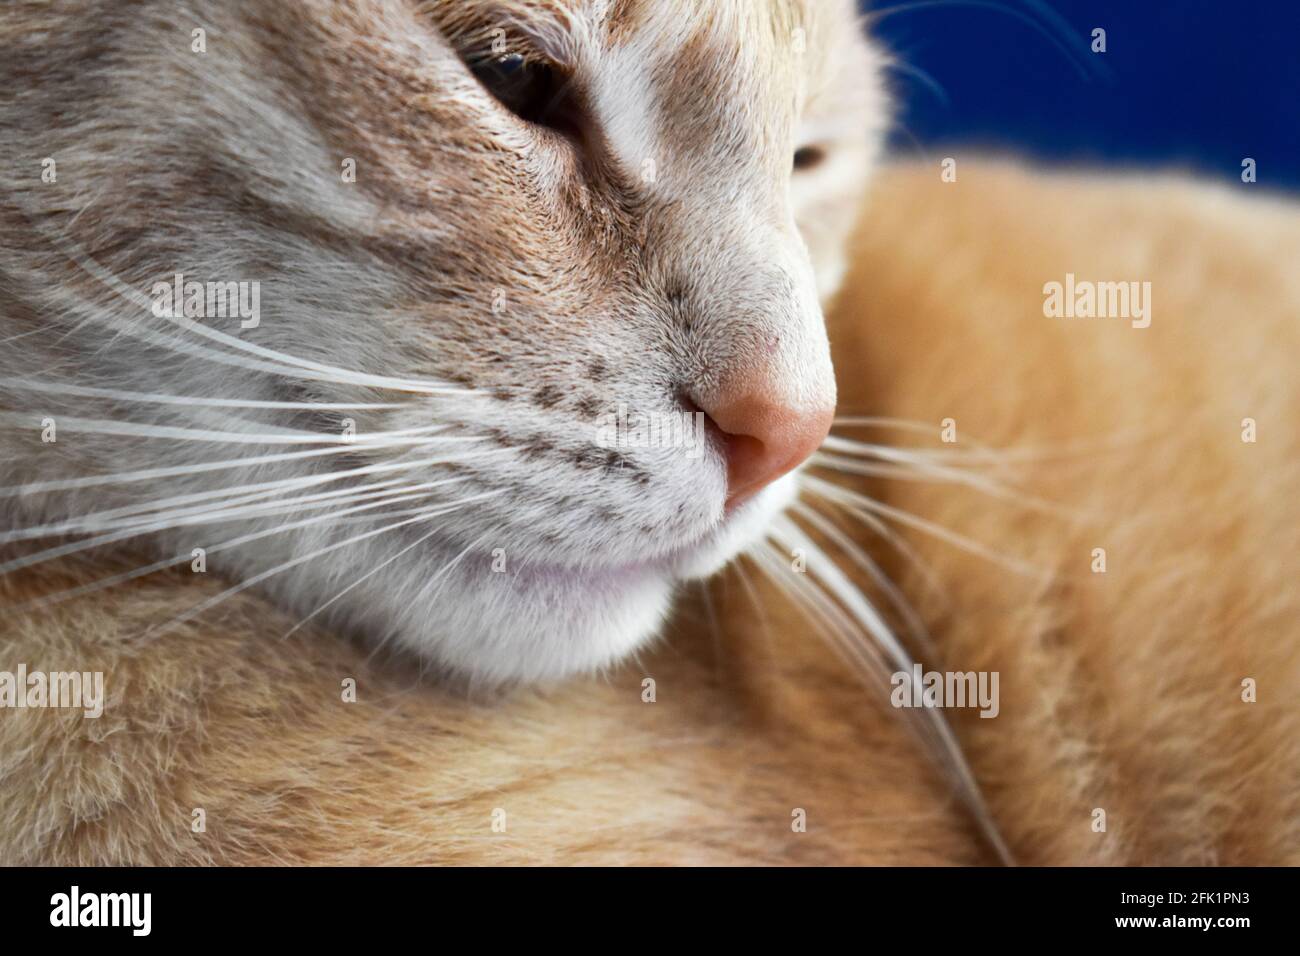 Ginger cat's nose close up Stock Photo